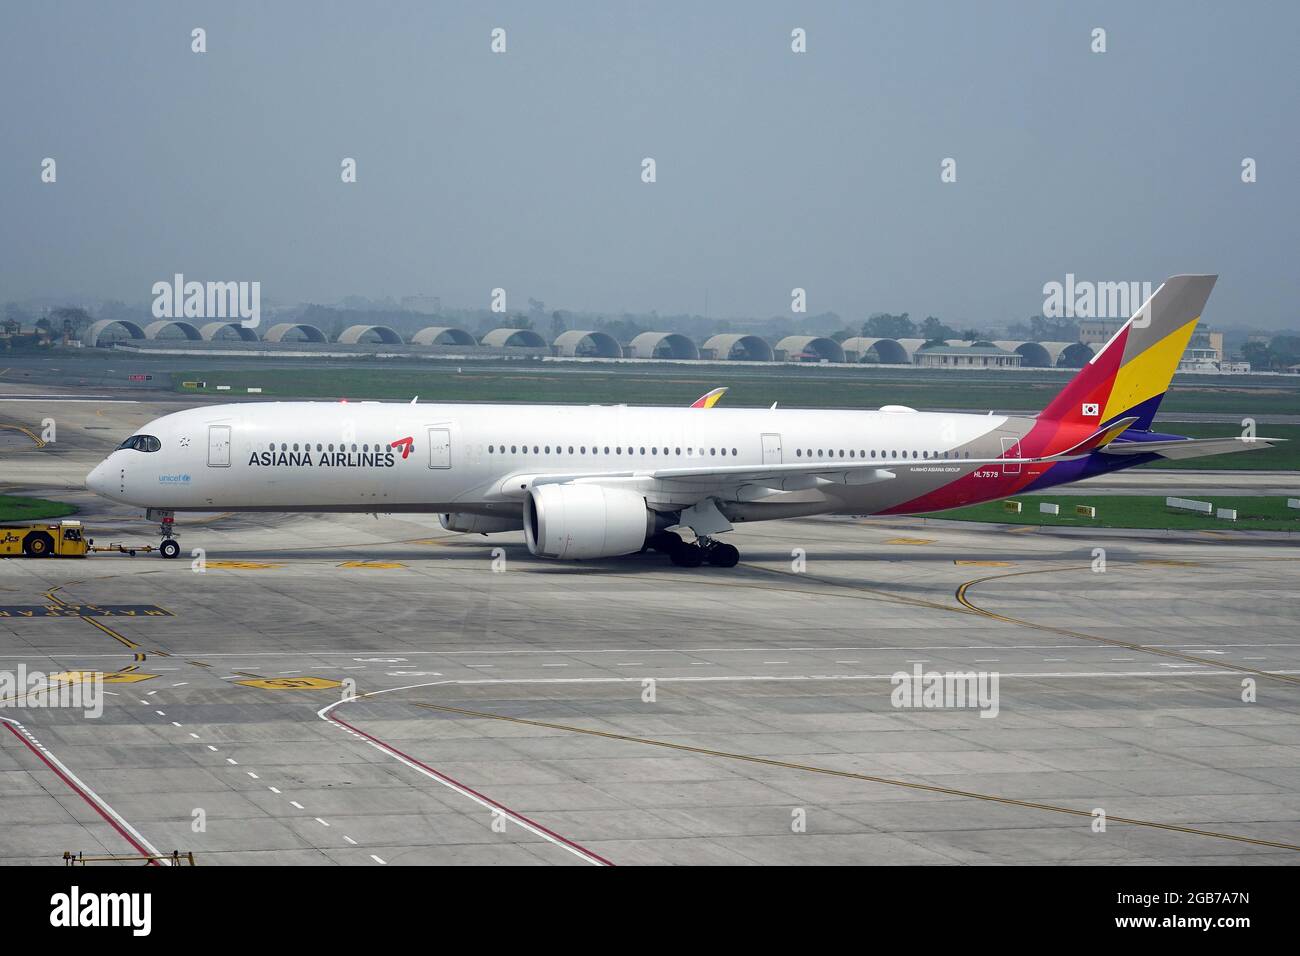 Asiana Airlines (is a South Korean airline) , Airbus A330-300 airplane Stock Photo